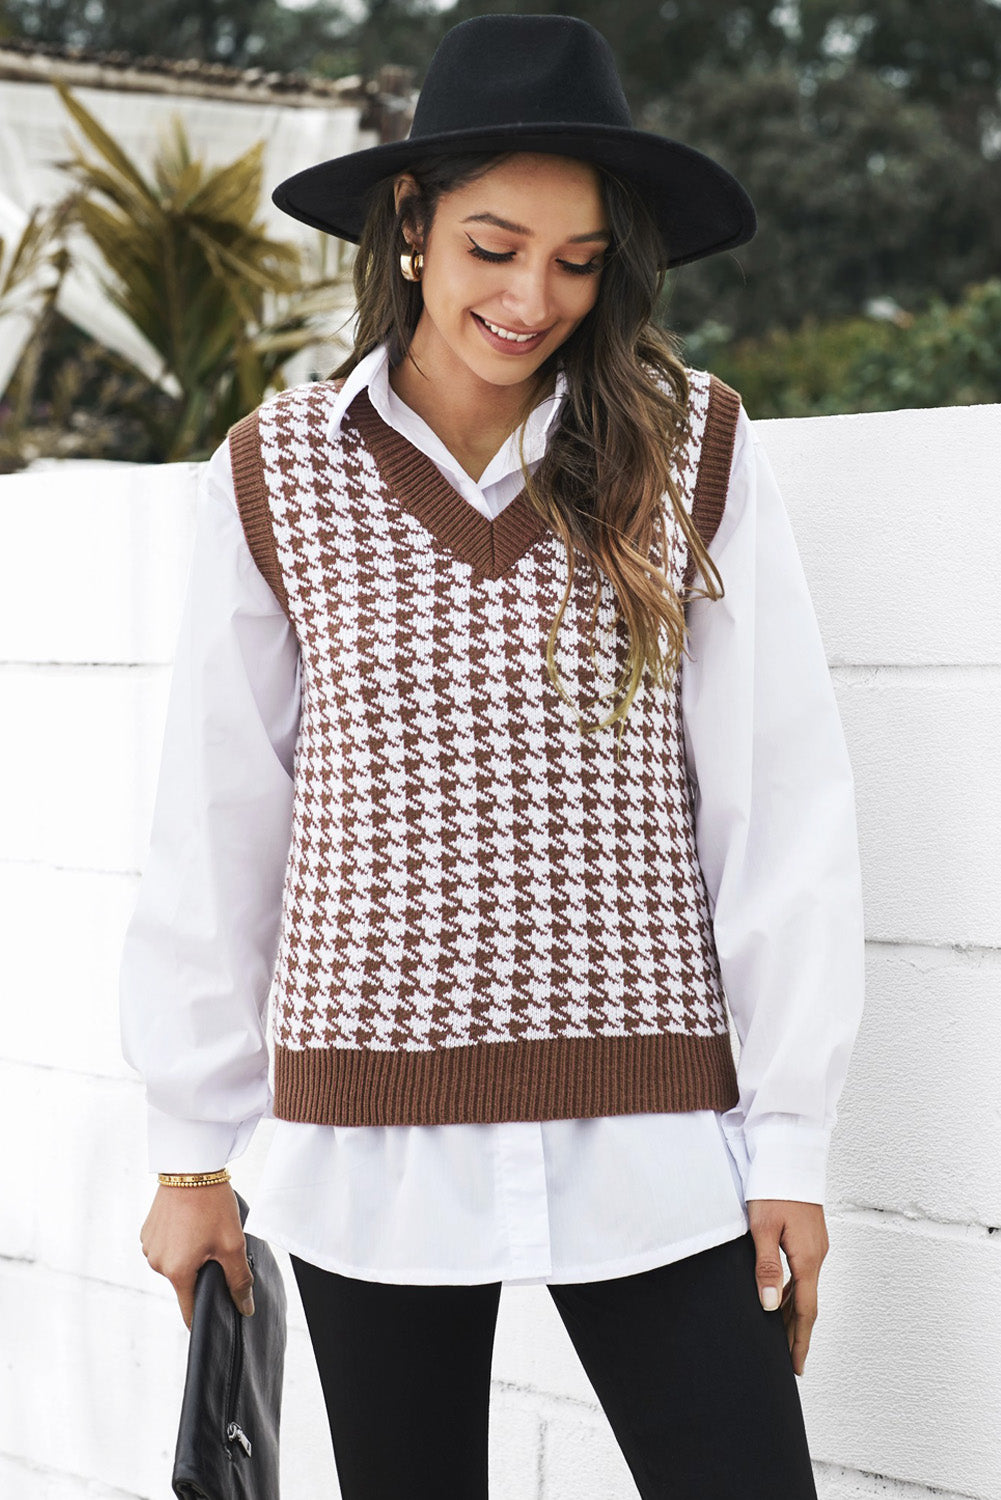 Women's Brown V Neck Houndstooth Knitted Sweater Vest